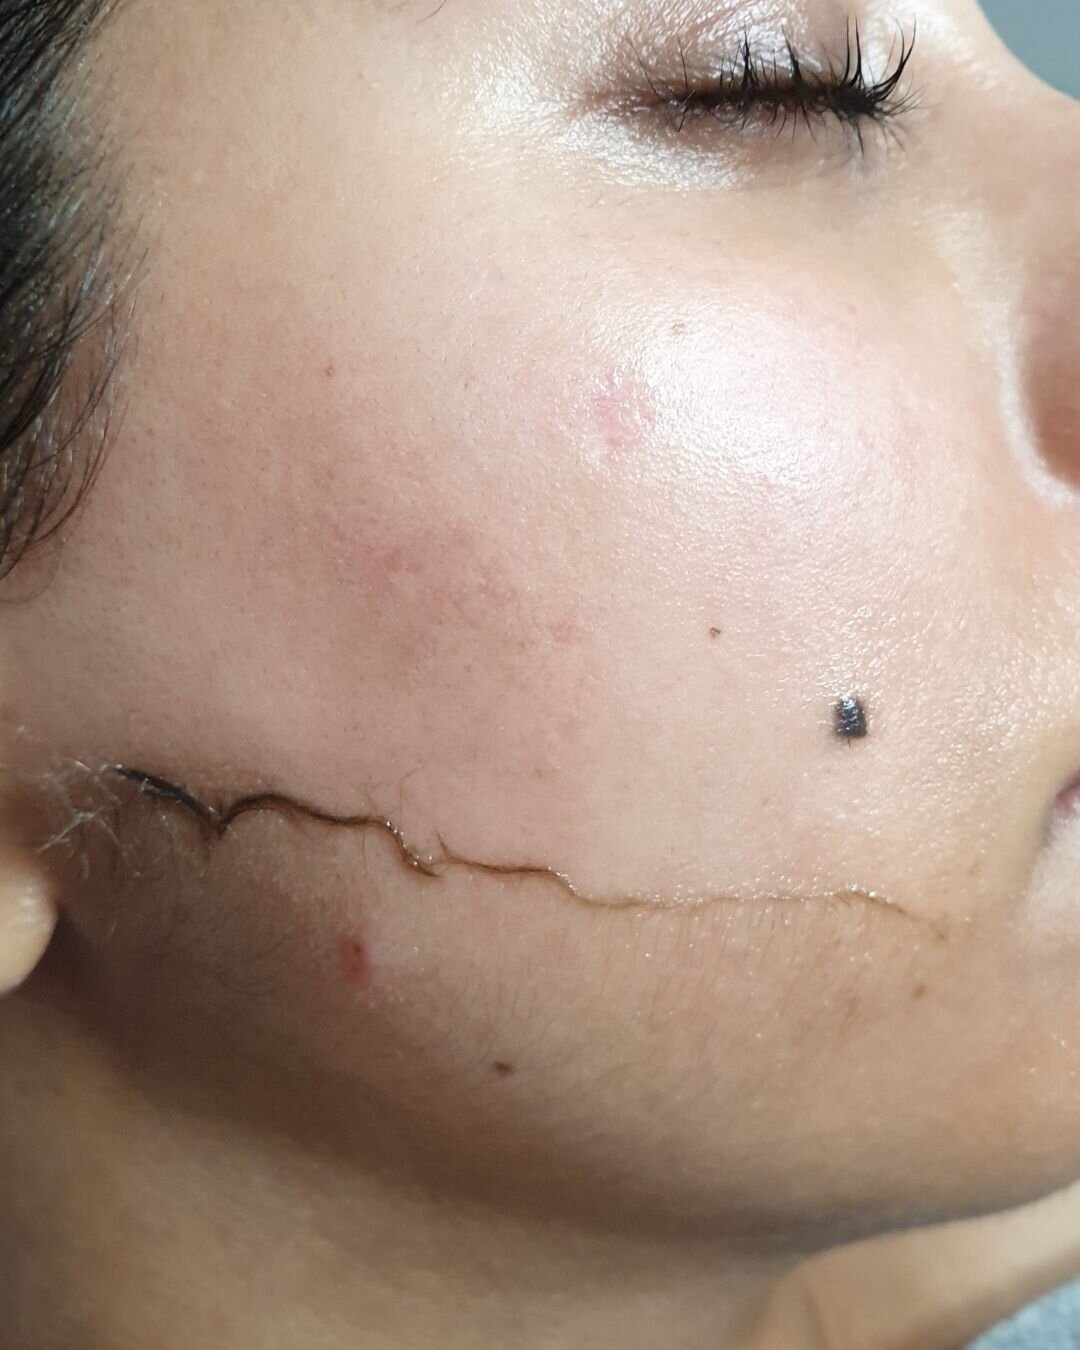 Are you looking for a way to get smoother, softer skin?

Epidermal levelling aka Dermaplaning is the perfect solution!

This non-invasive treatment works to remove the outermost layers of the epidermis as well as removing fine vellus hair (that peach